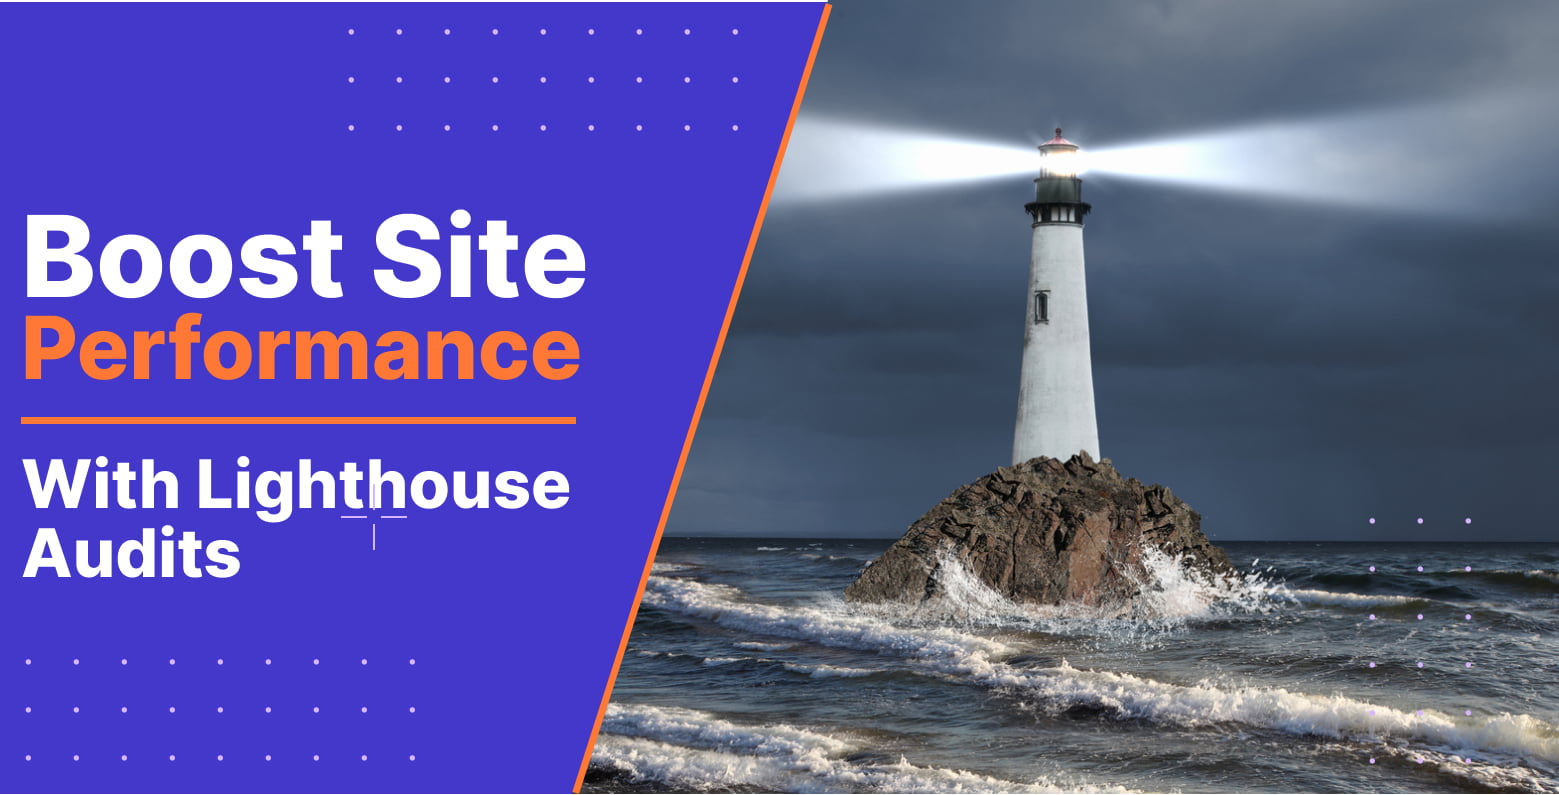 Boost site performance with lighthouse